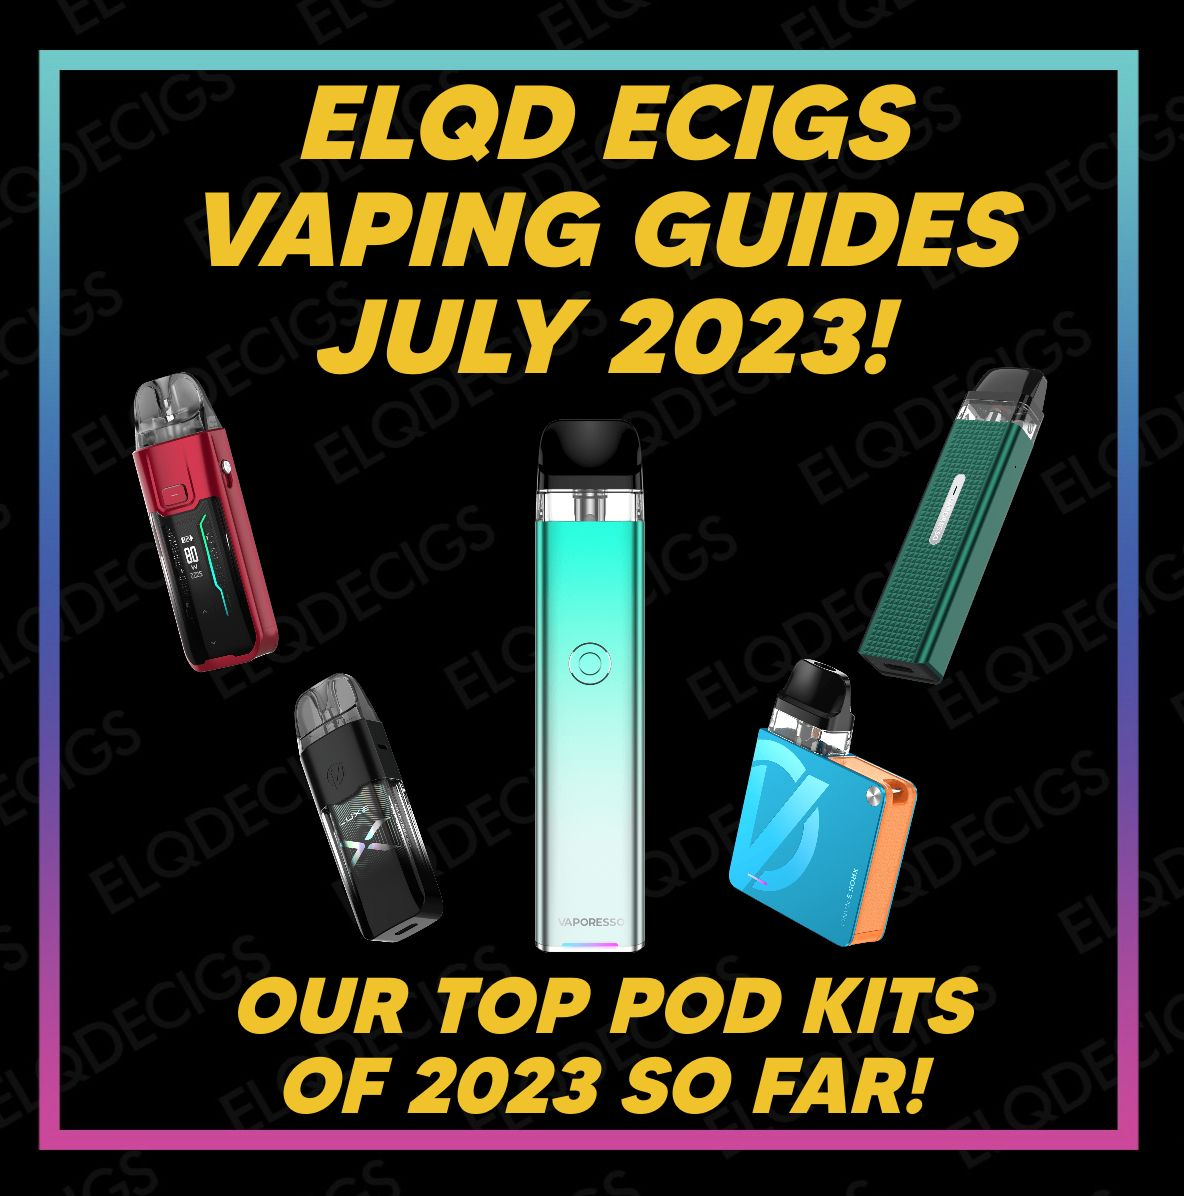 Read More About The Article Our Top Pod Kits Of 2023 So Far! Elqd Ecigs July 2023 Vaping Guides!